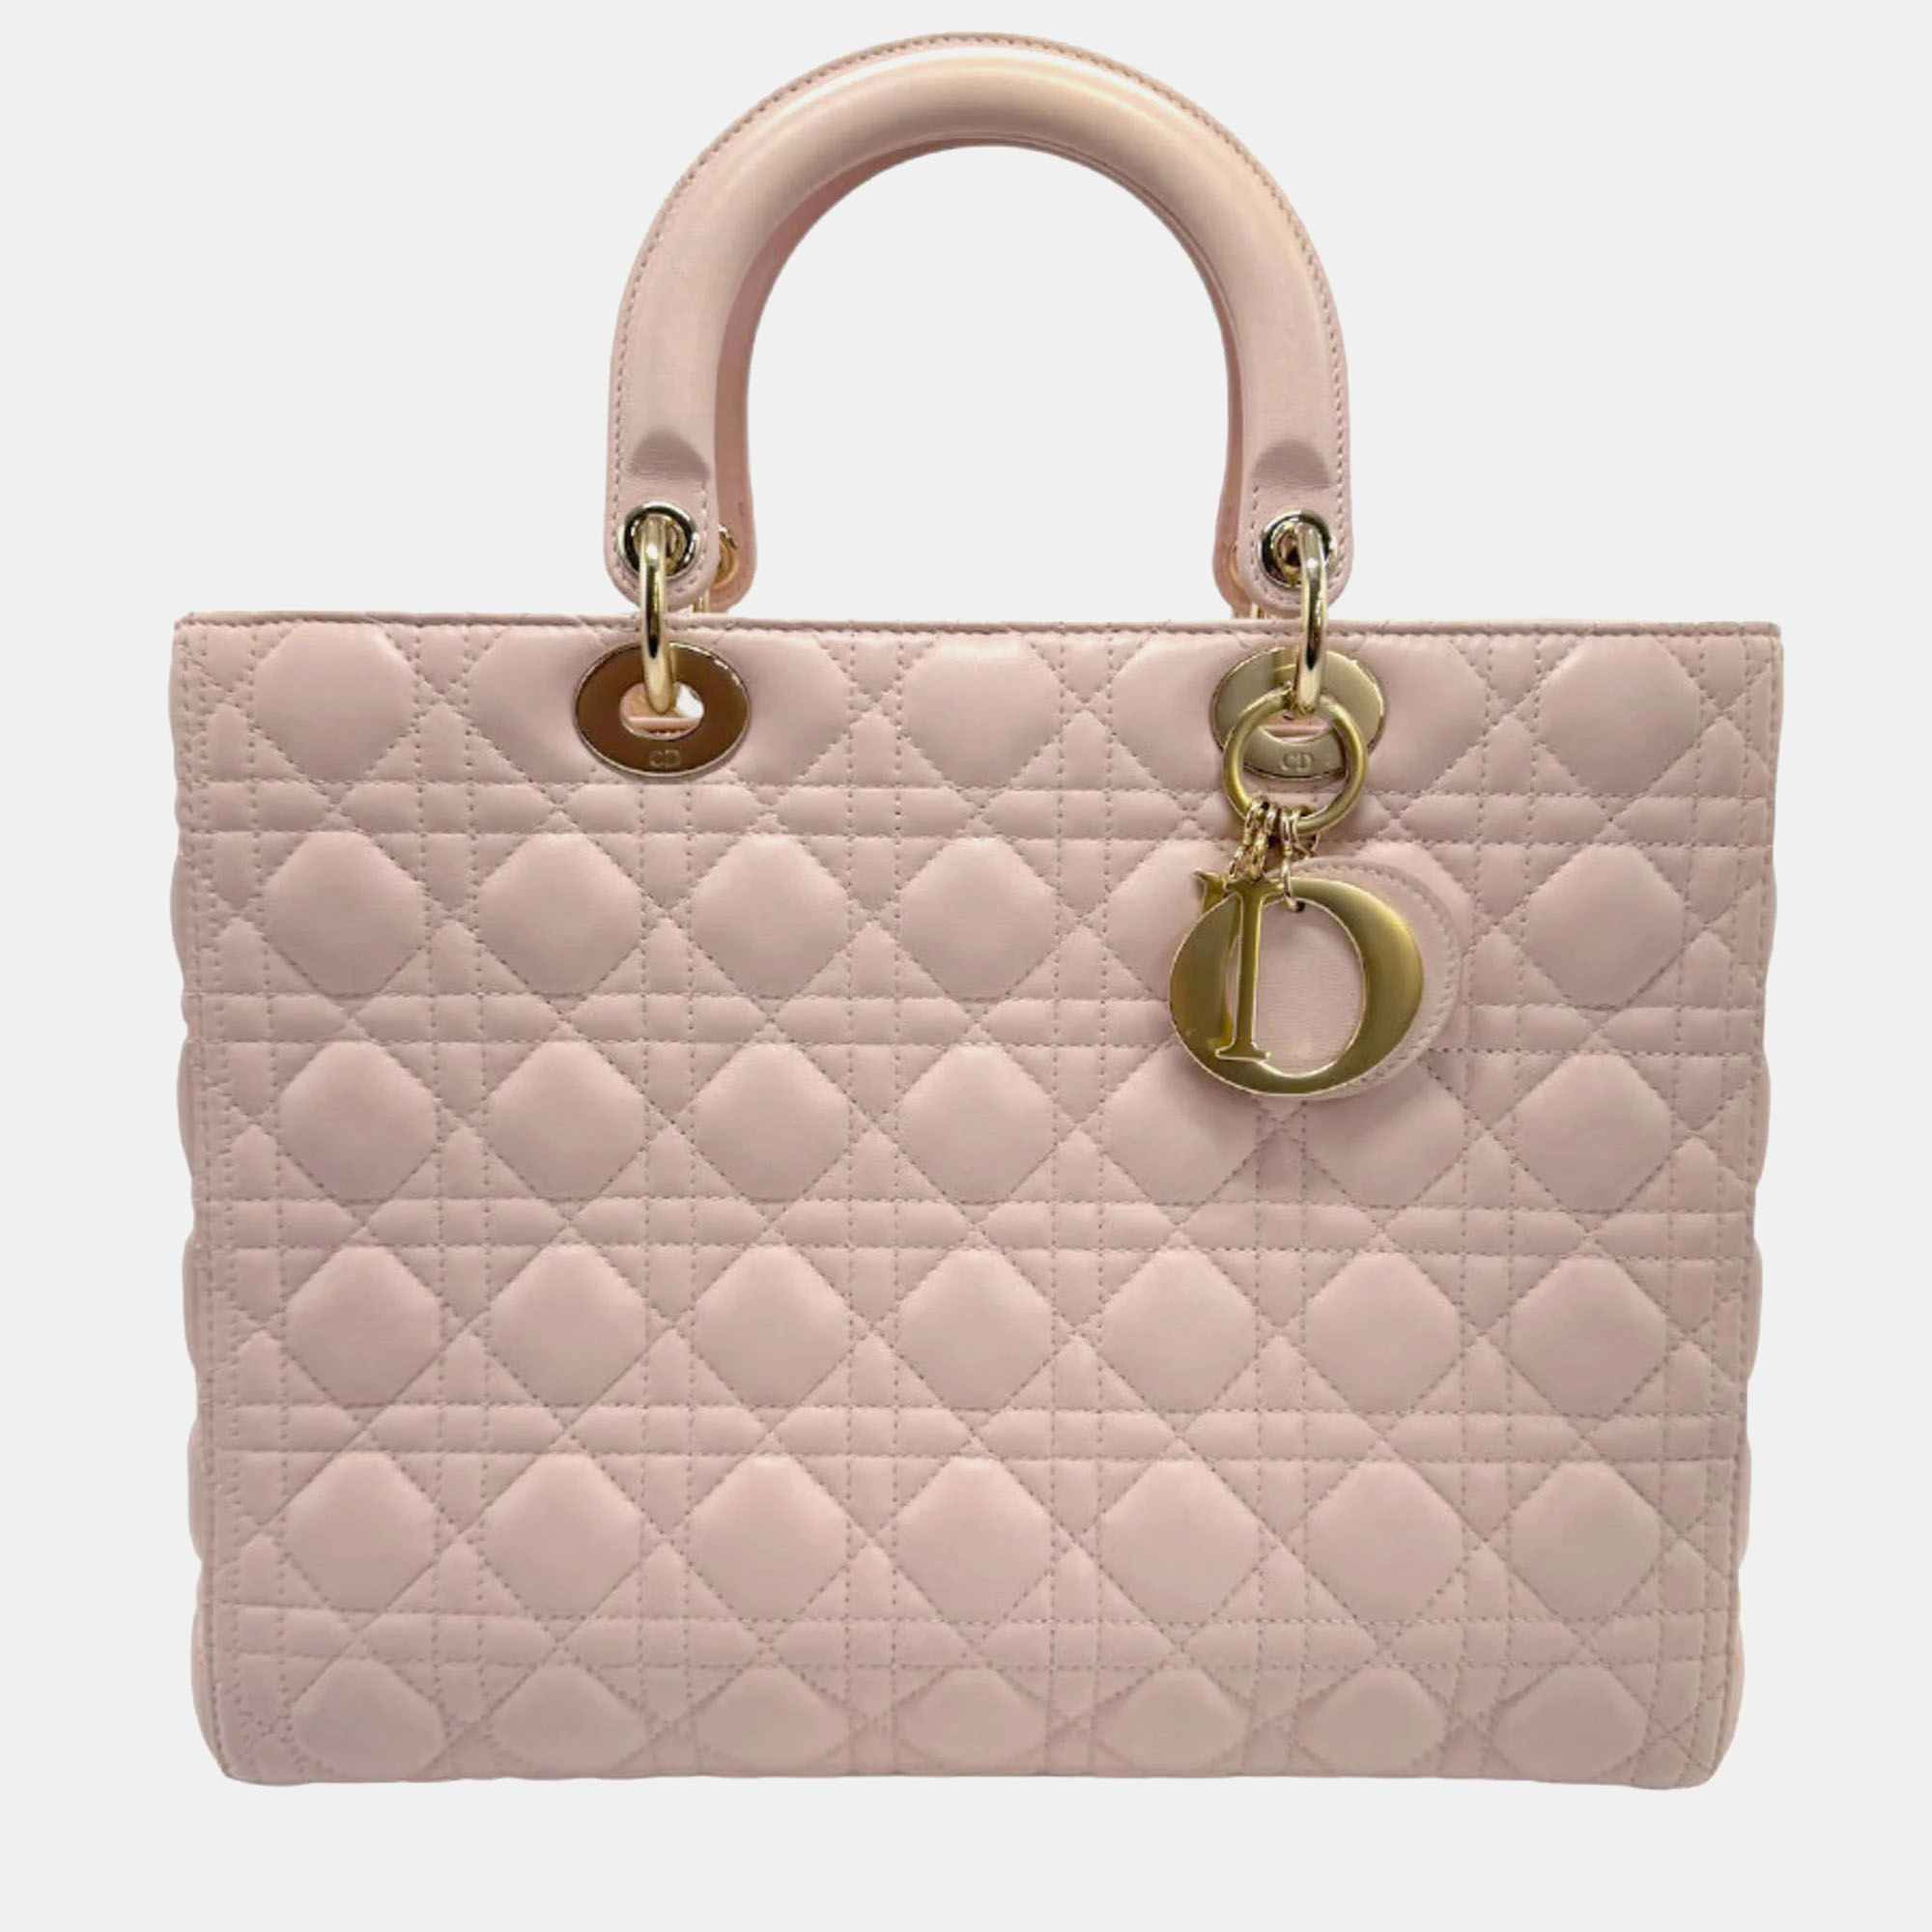 Dior pink leather large lady dior top handle bag